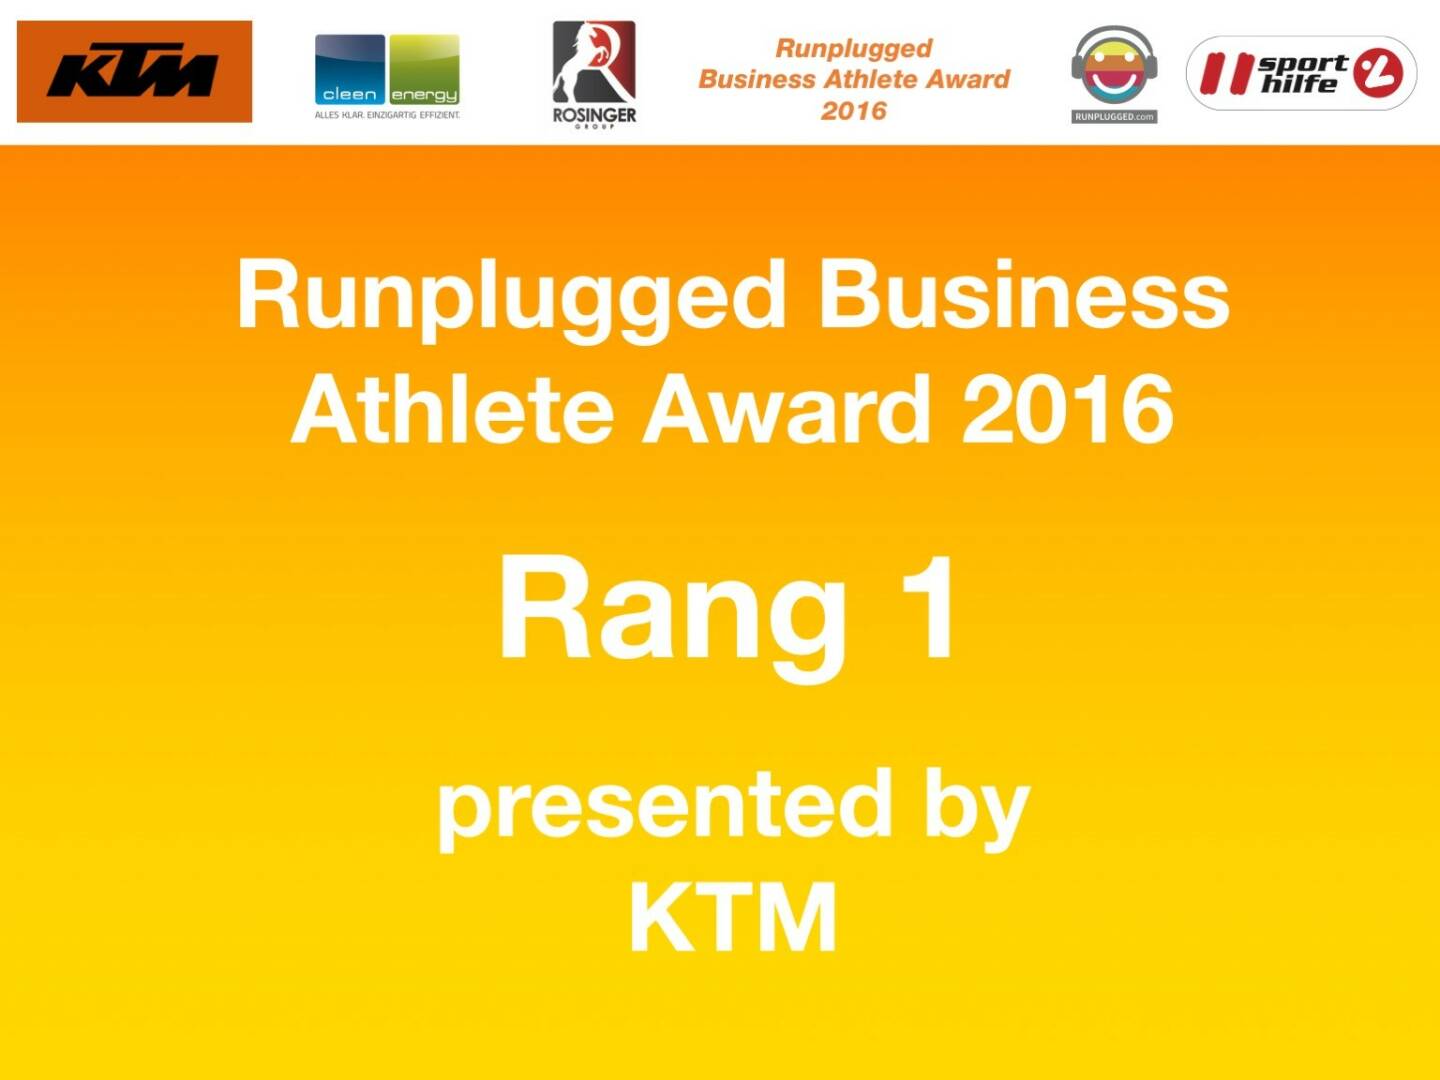 Business Athelete Award 2016 - Rang 1 presented by KTM